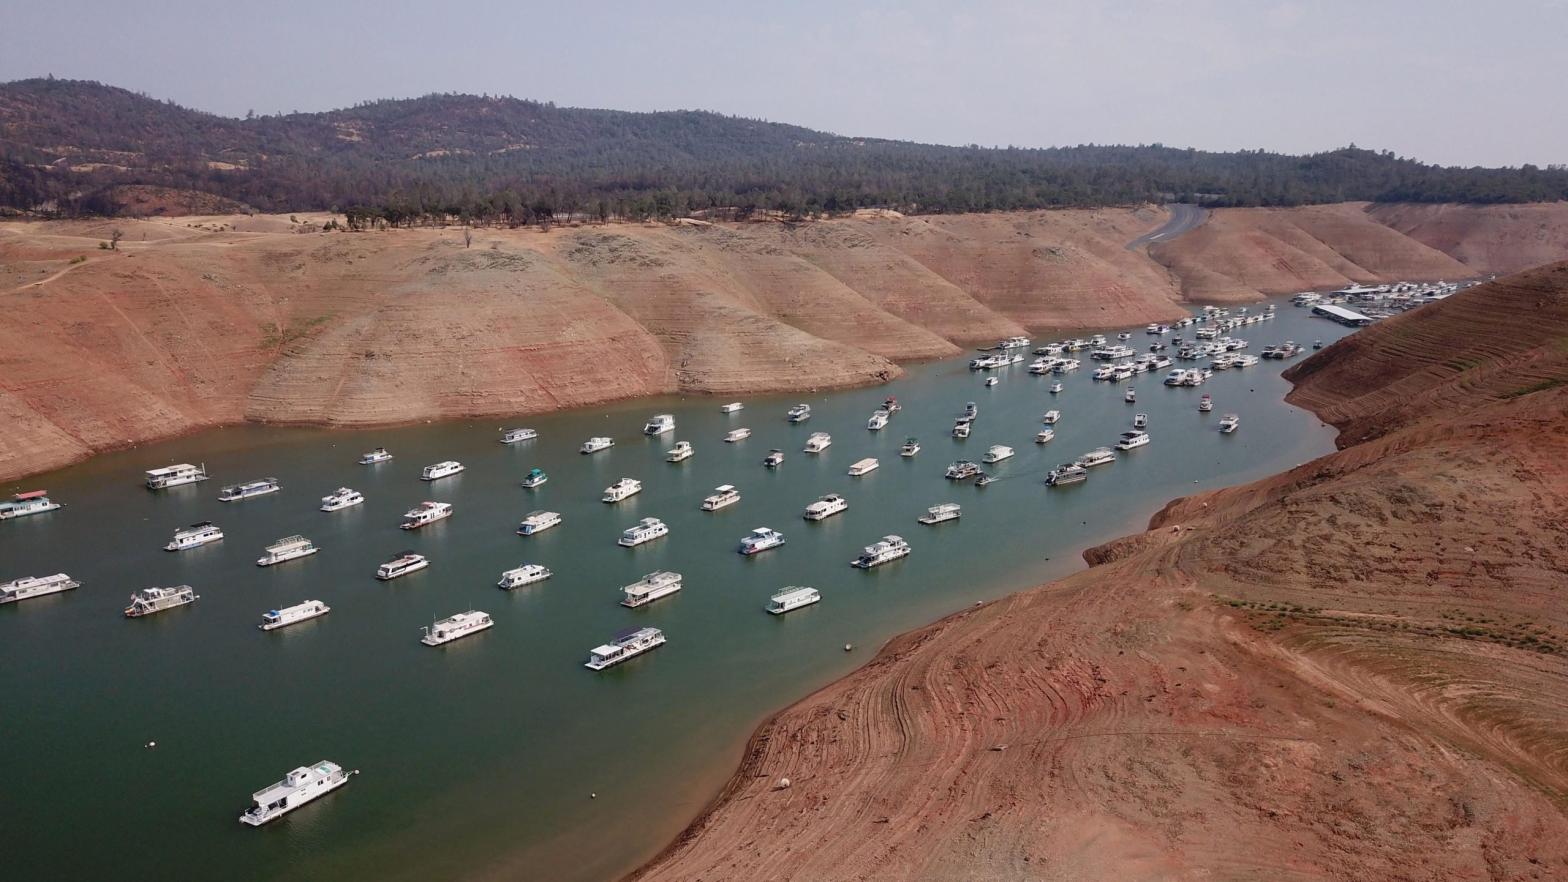 Houseboats sit in low water on Lake Oroville as California's drought emergency worsens. (Photo: Robyn Beck/AFP, Getty Images)